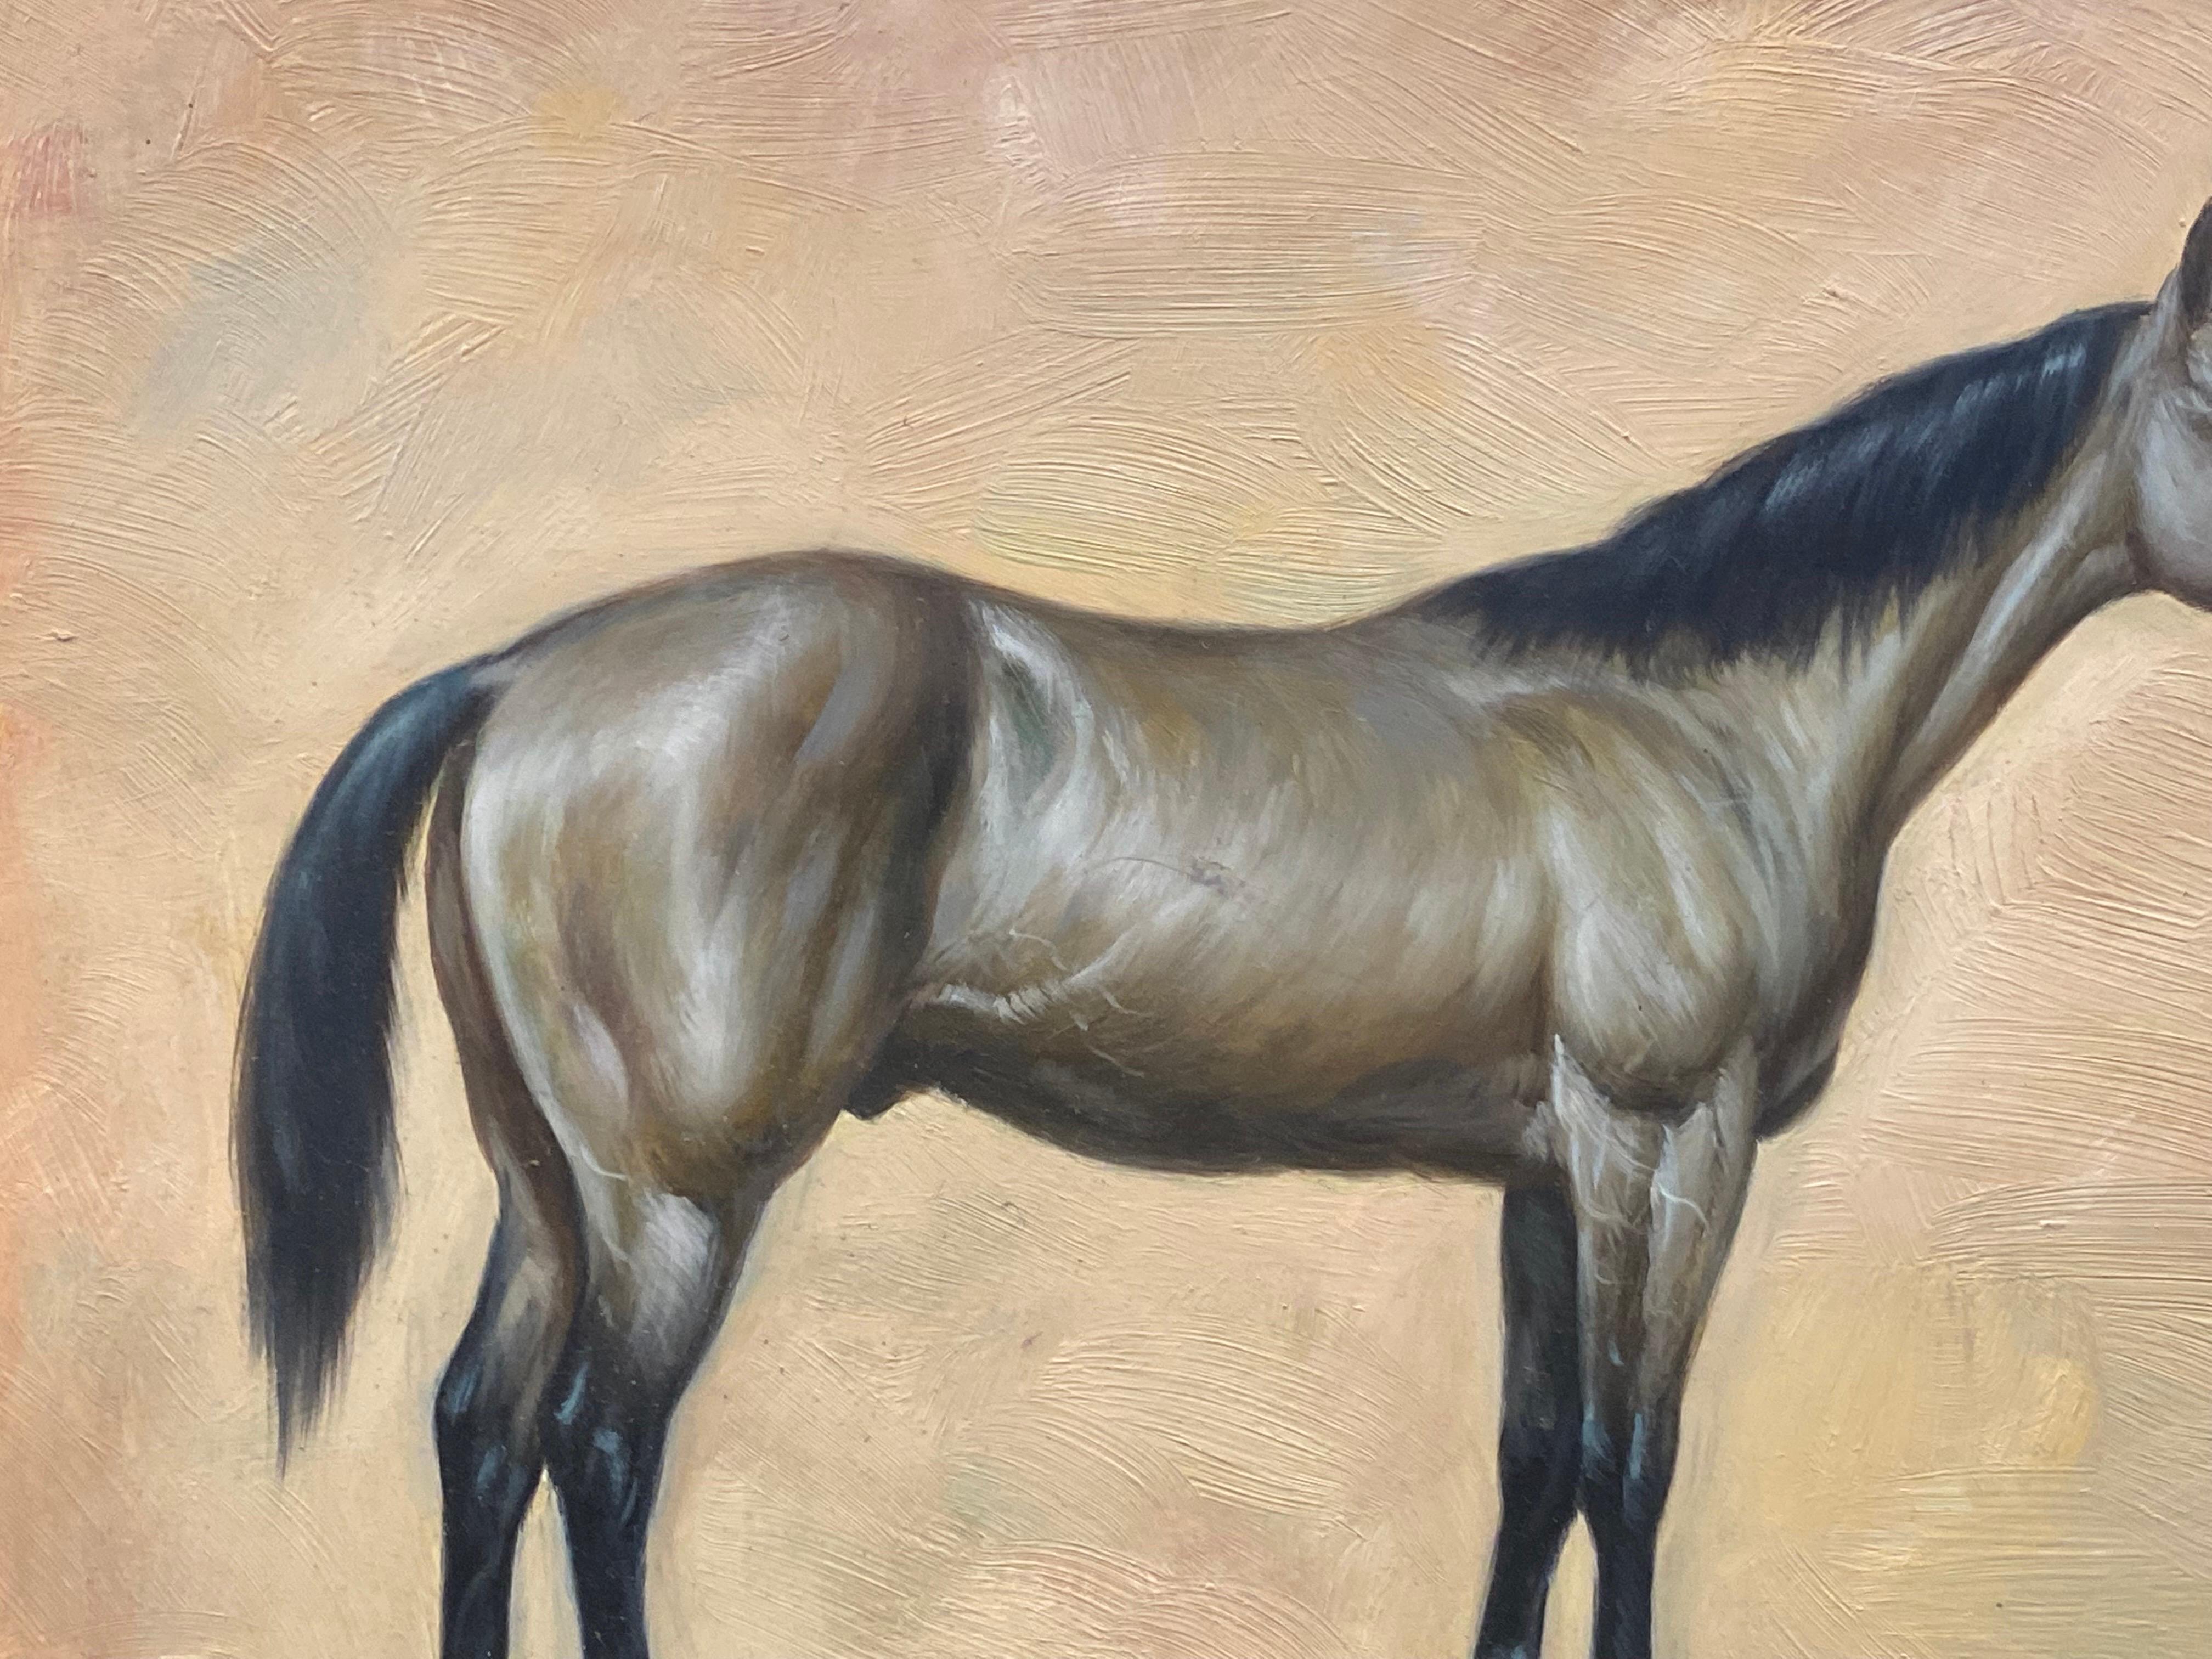 painting on horses bodies